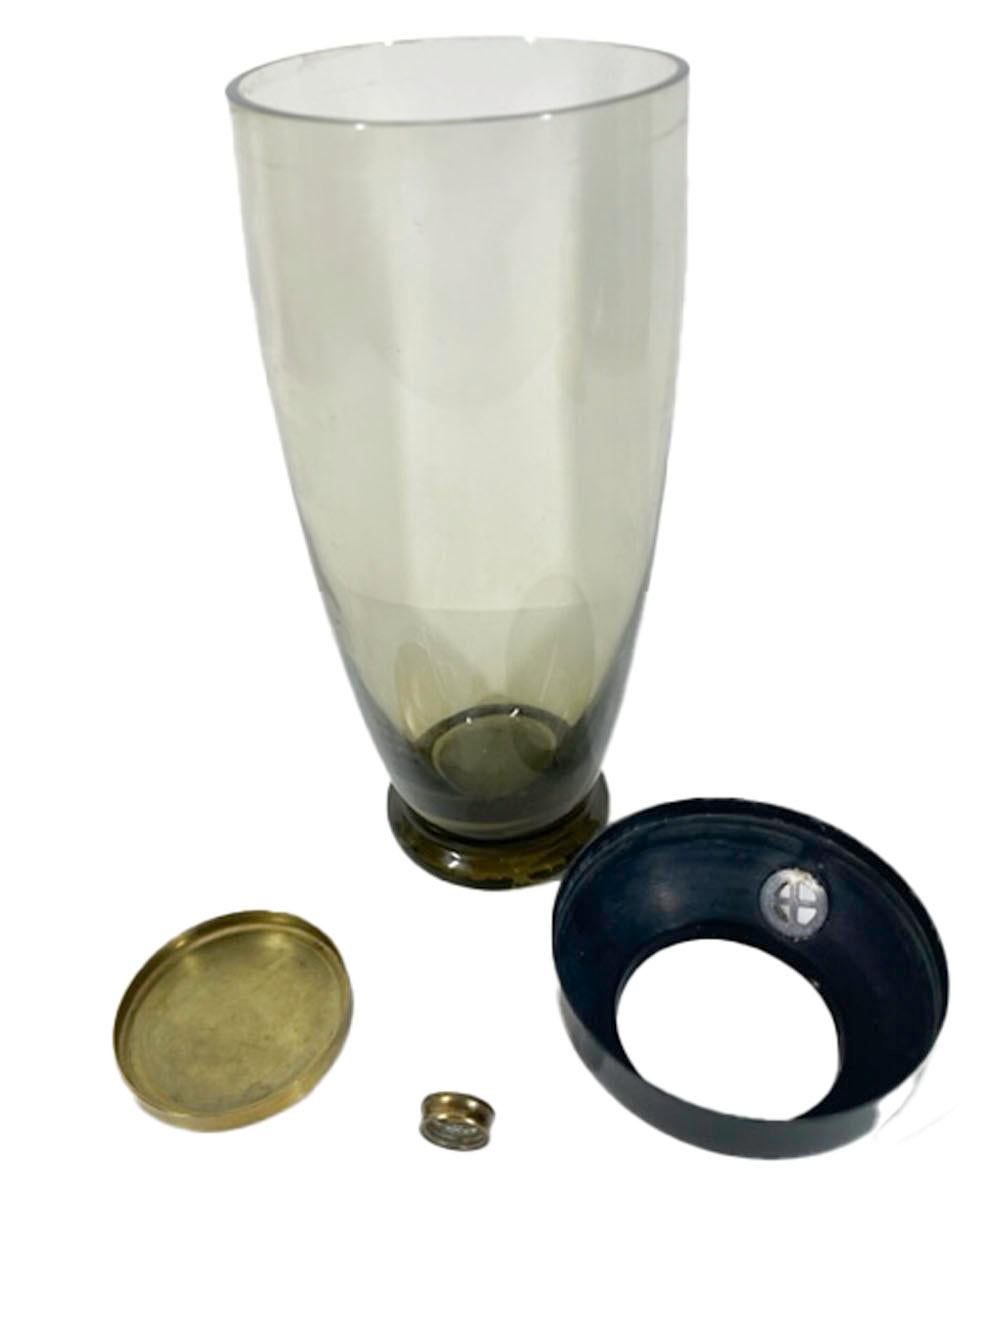 Art Deco, olive green glass footed cocktail shaker with a black enameled steel lid having a brass cover and screw-on spout cap.